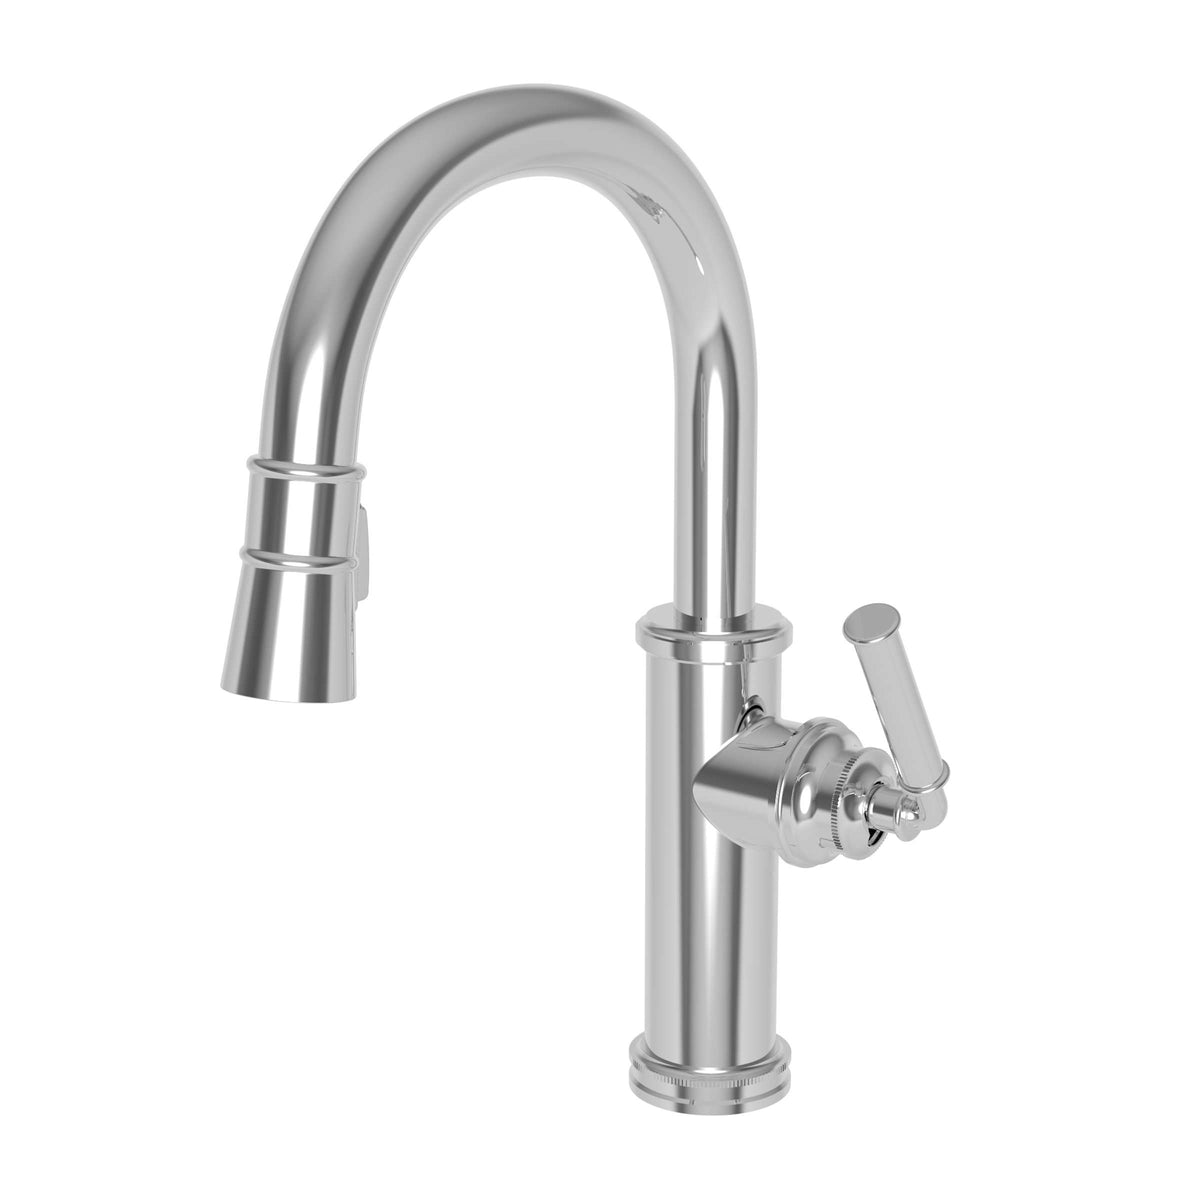 Check us out online! Go online to visit us Newport Brass 2940-5223 Taft  Prep/Bar Pull Down Faucet Newport Brass